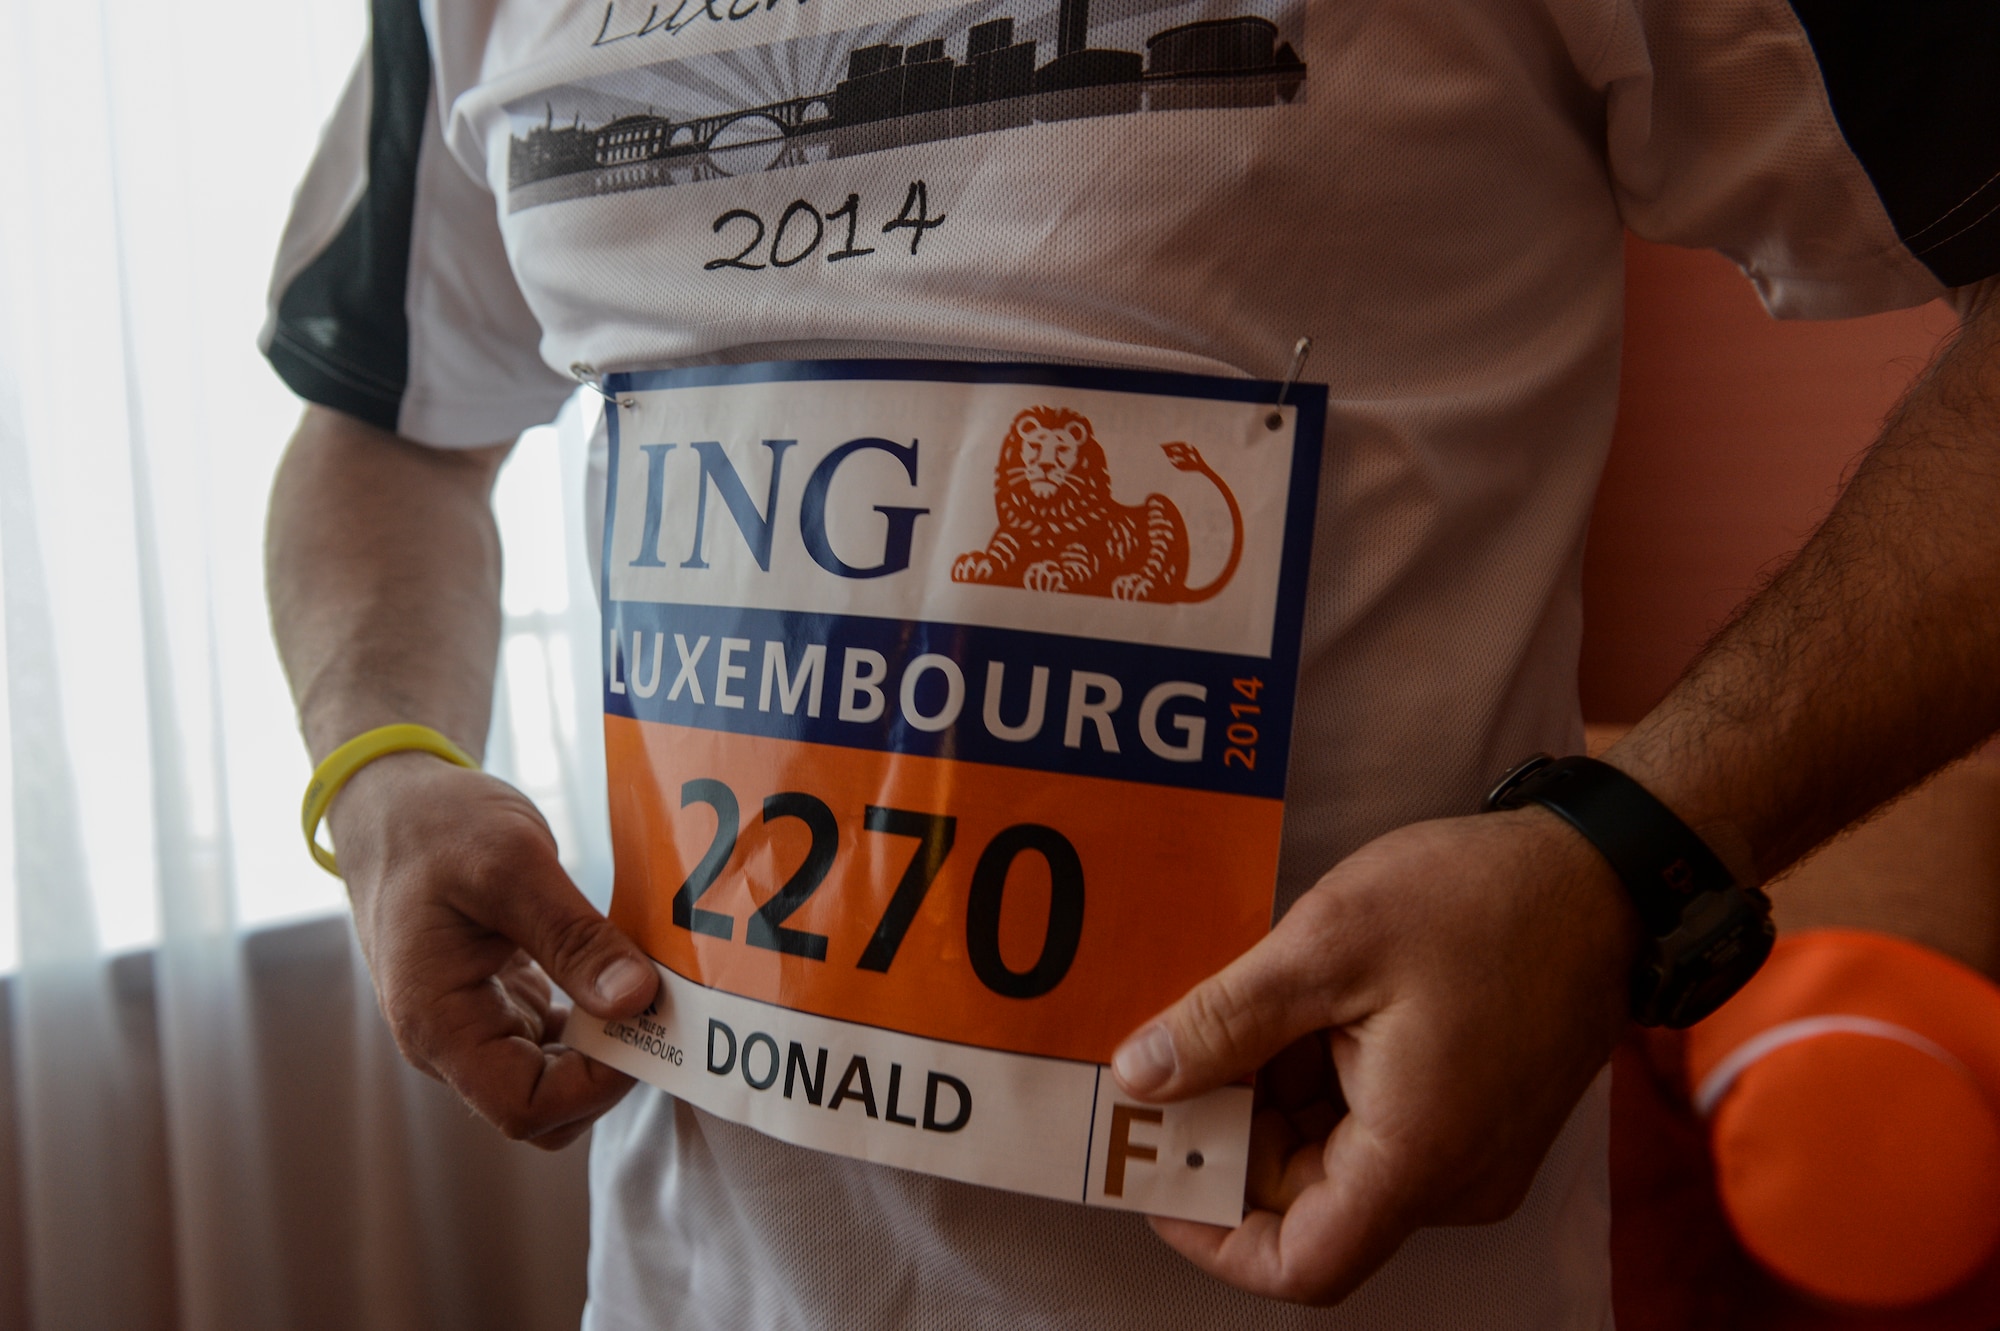 U.S. Air Force Master Sgt. Donald Stichter, 52nd Equipment Maintenance Squadron NCO in charge of munitions inspection from Lakewood, Colo., tacks his number to a shirt prior to the start of the ING Luxembourg Night Marathon May 31, 2014, in Luxembourg. More than 9,000 people competed in the race. (U.S. Air Force photo by Senior Airman Rusty Frank/Released)